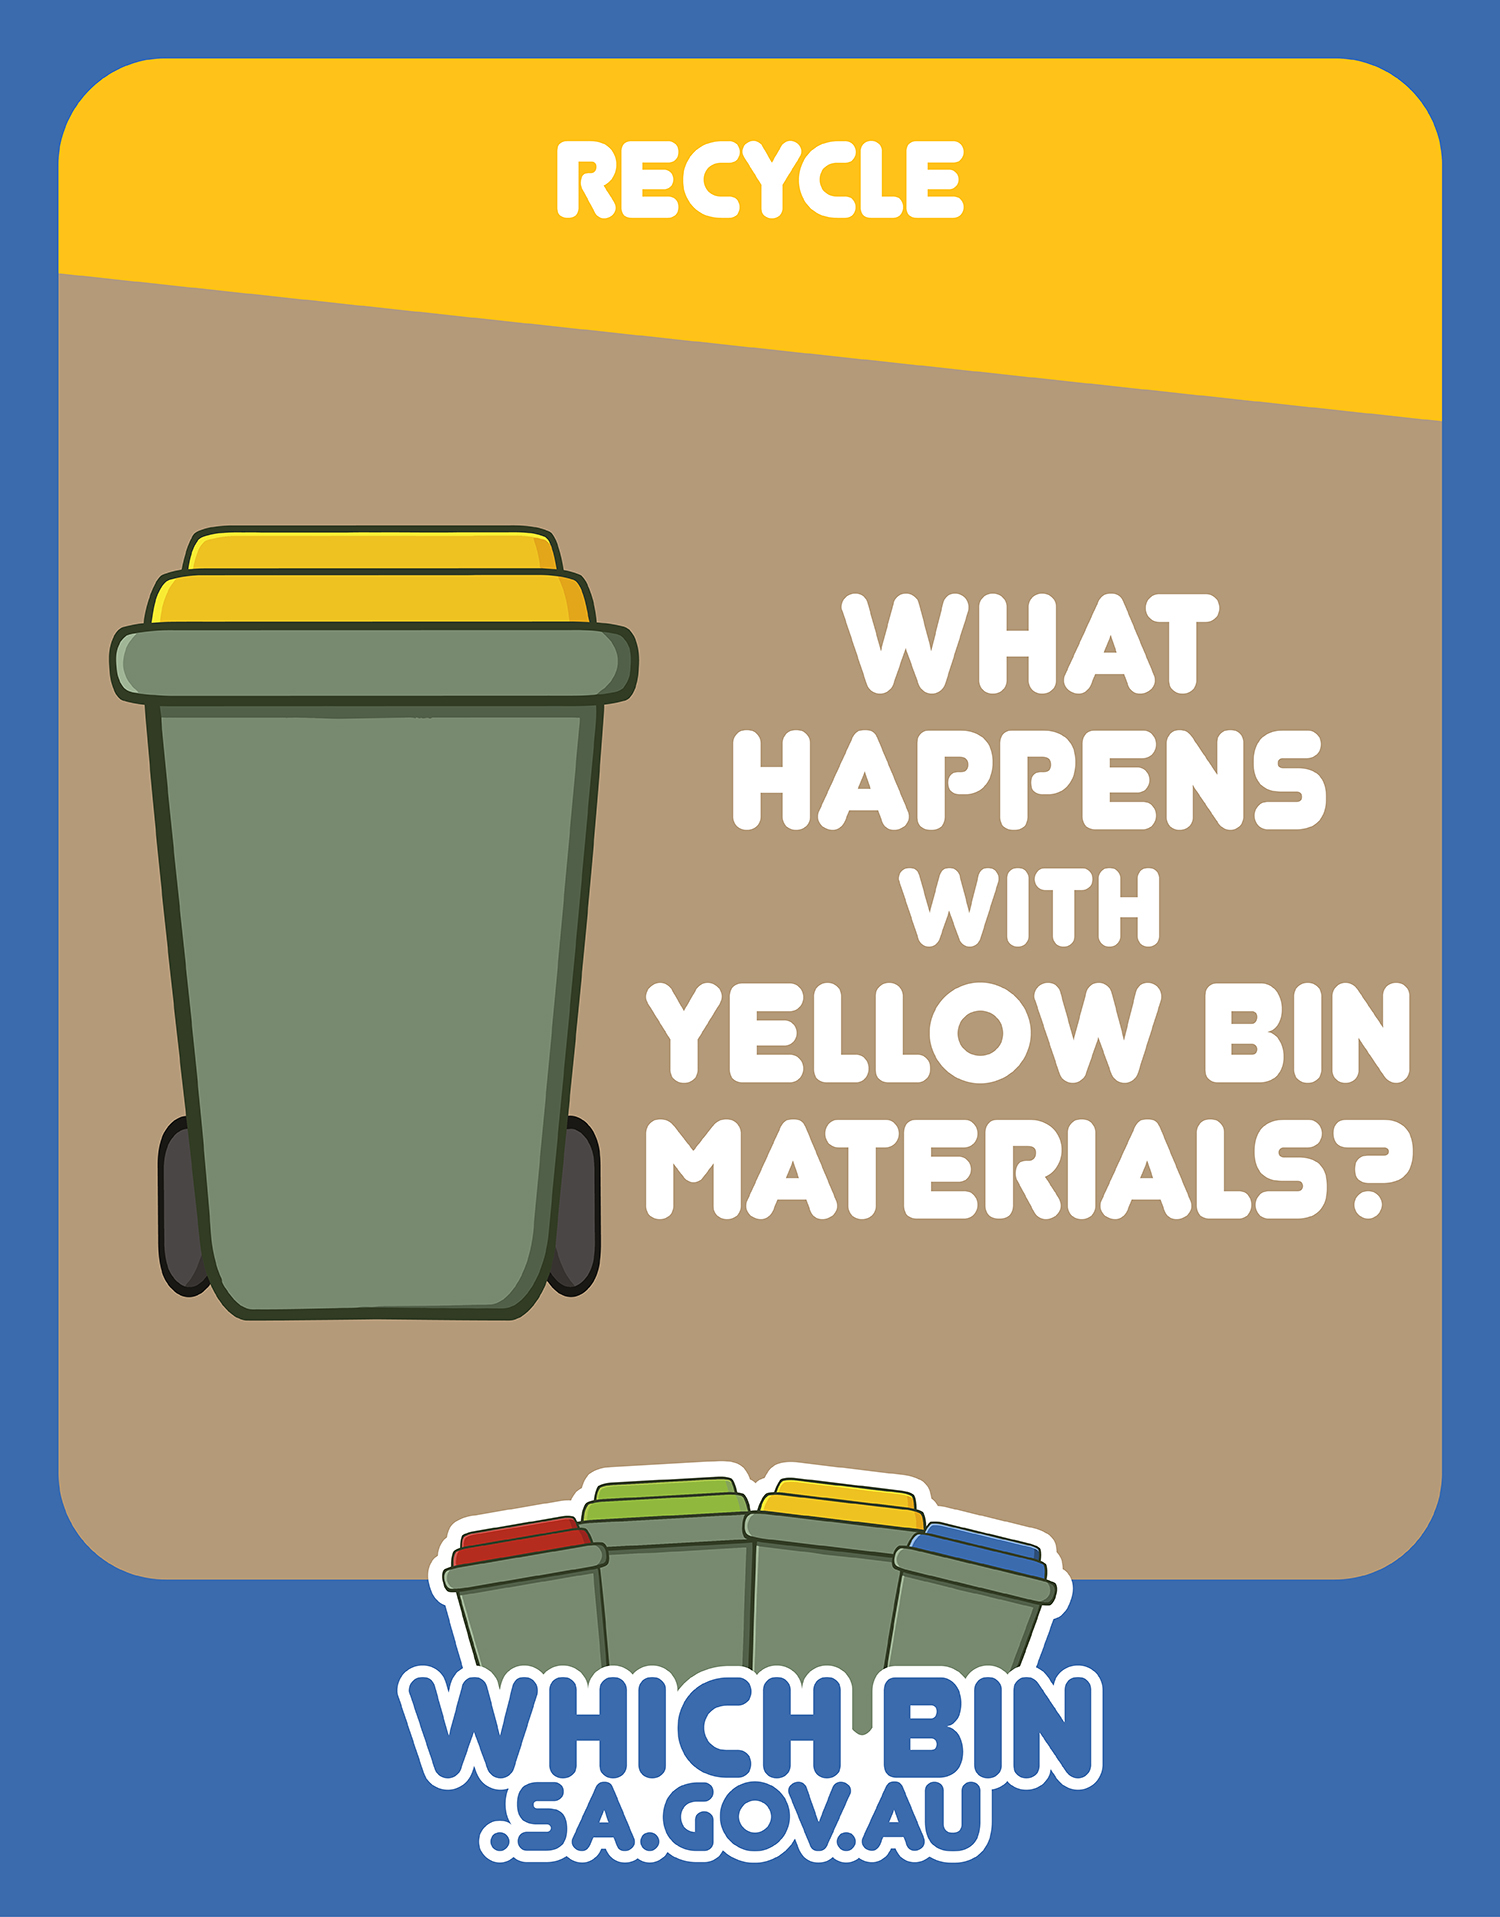 What happens with yellow bin materials?